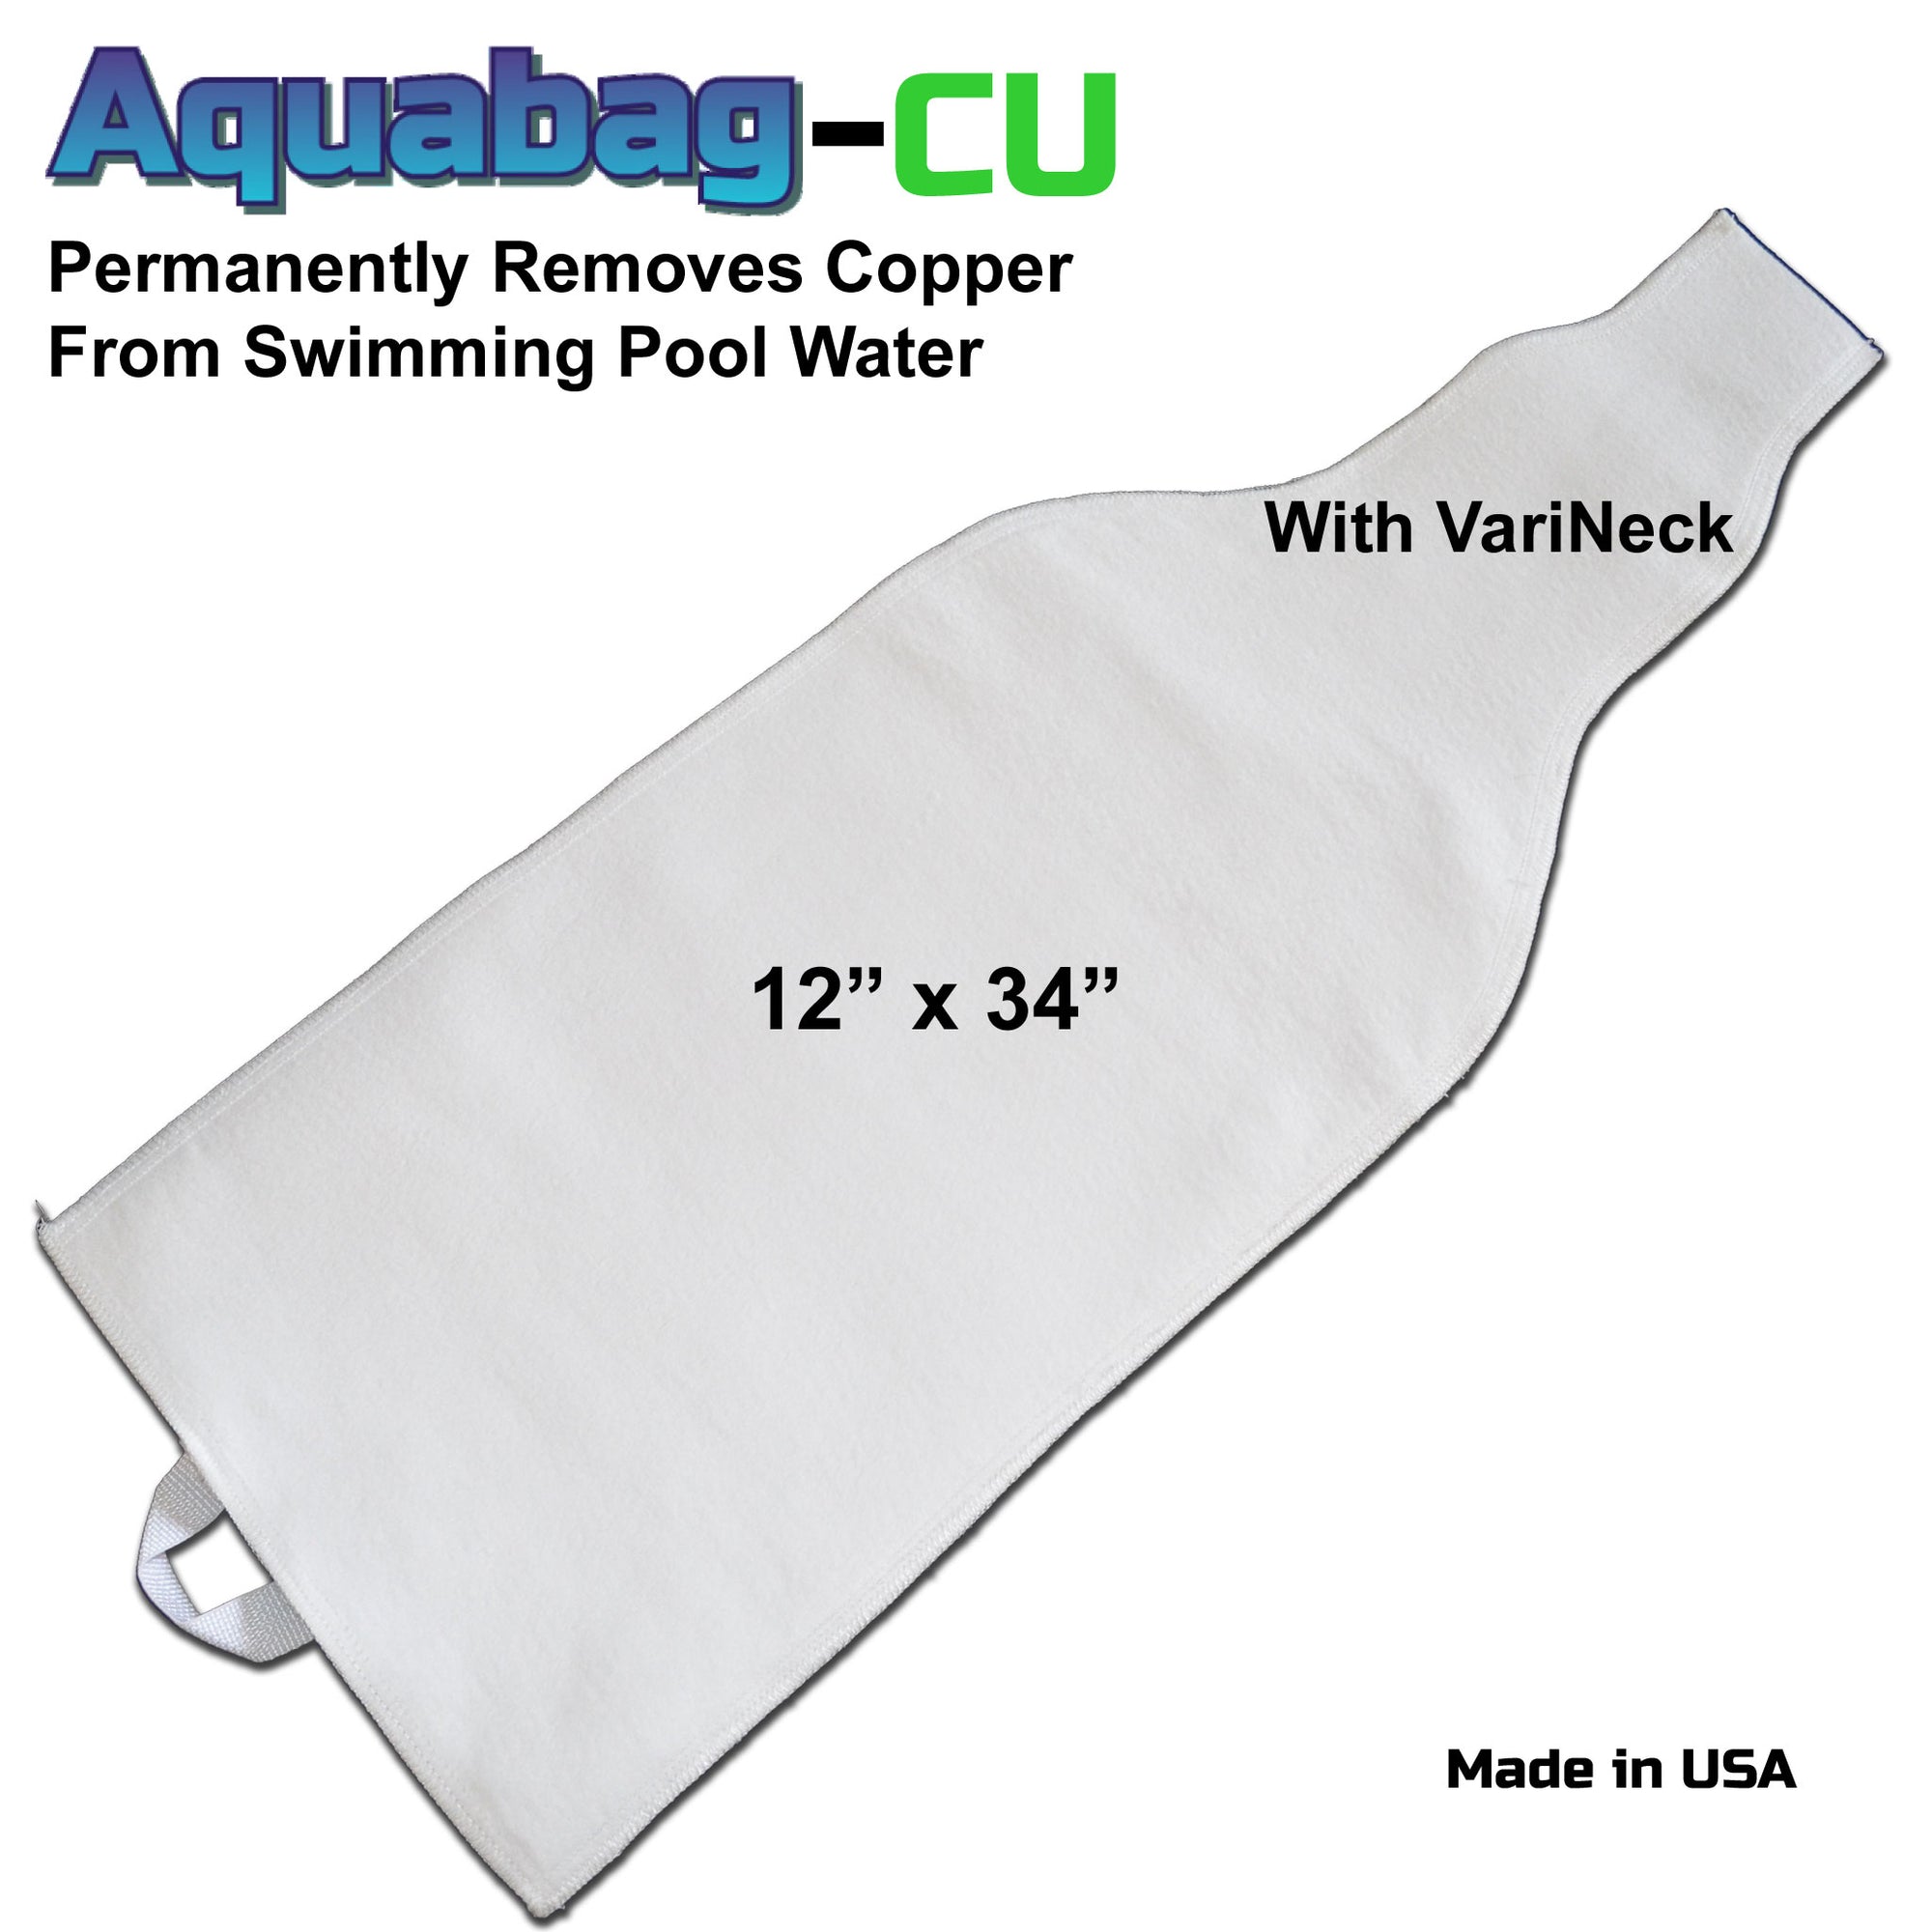 Aquabag CU Swimming Pool Copper Removal Filter 12x34 inches with stepped connection neck made in the USA